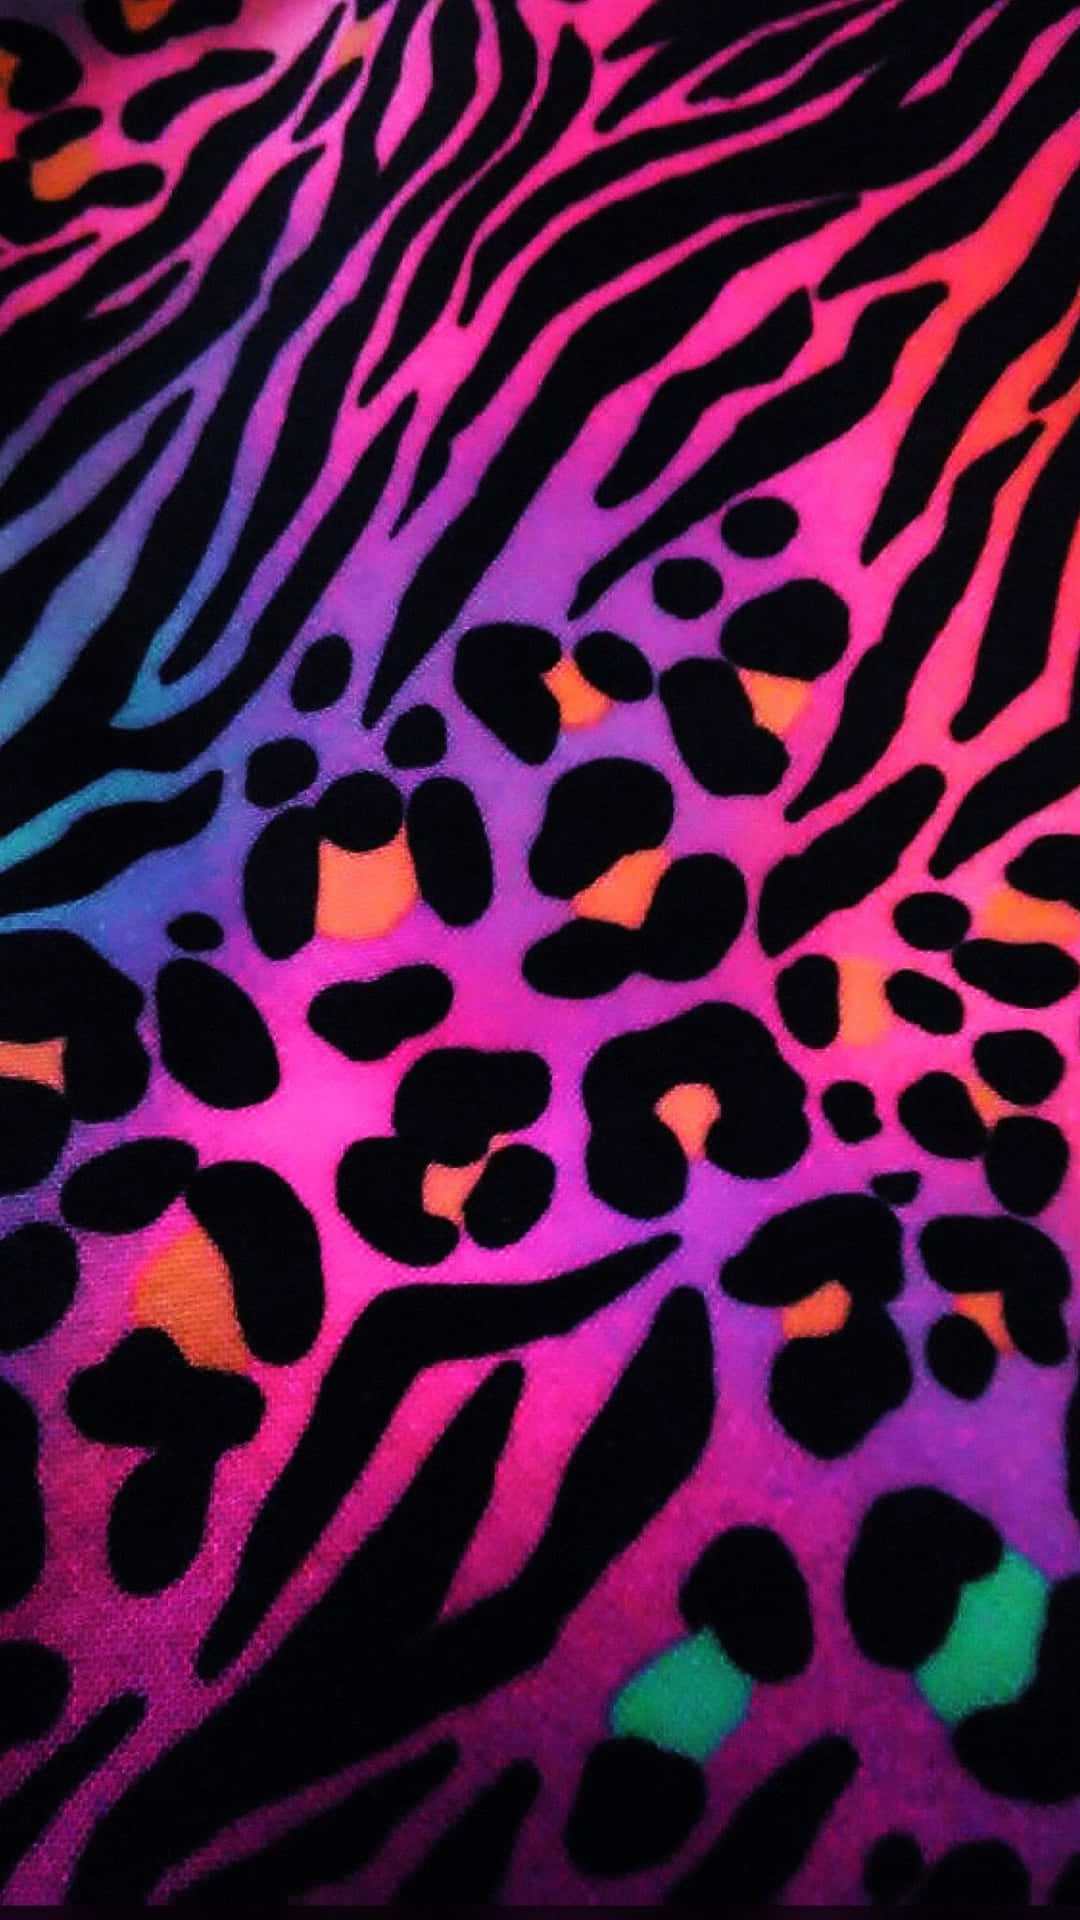 A Colorful Zebra Print Wallpaper With Neon Lights Wallpaper